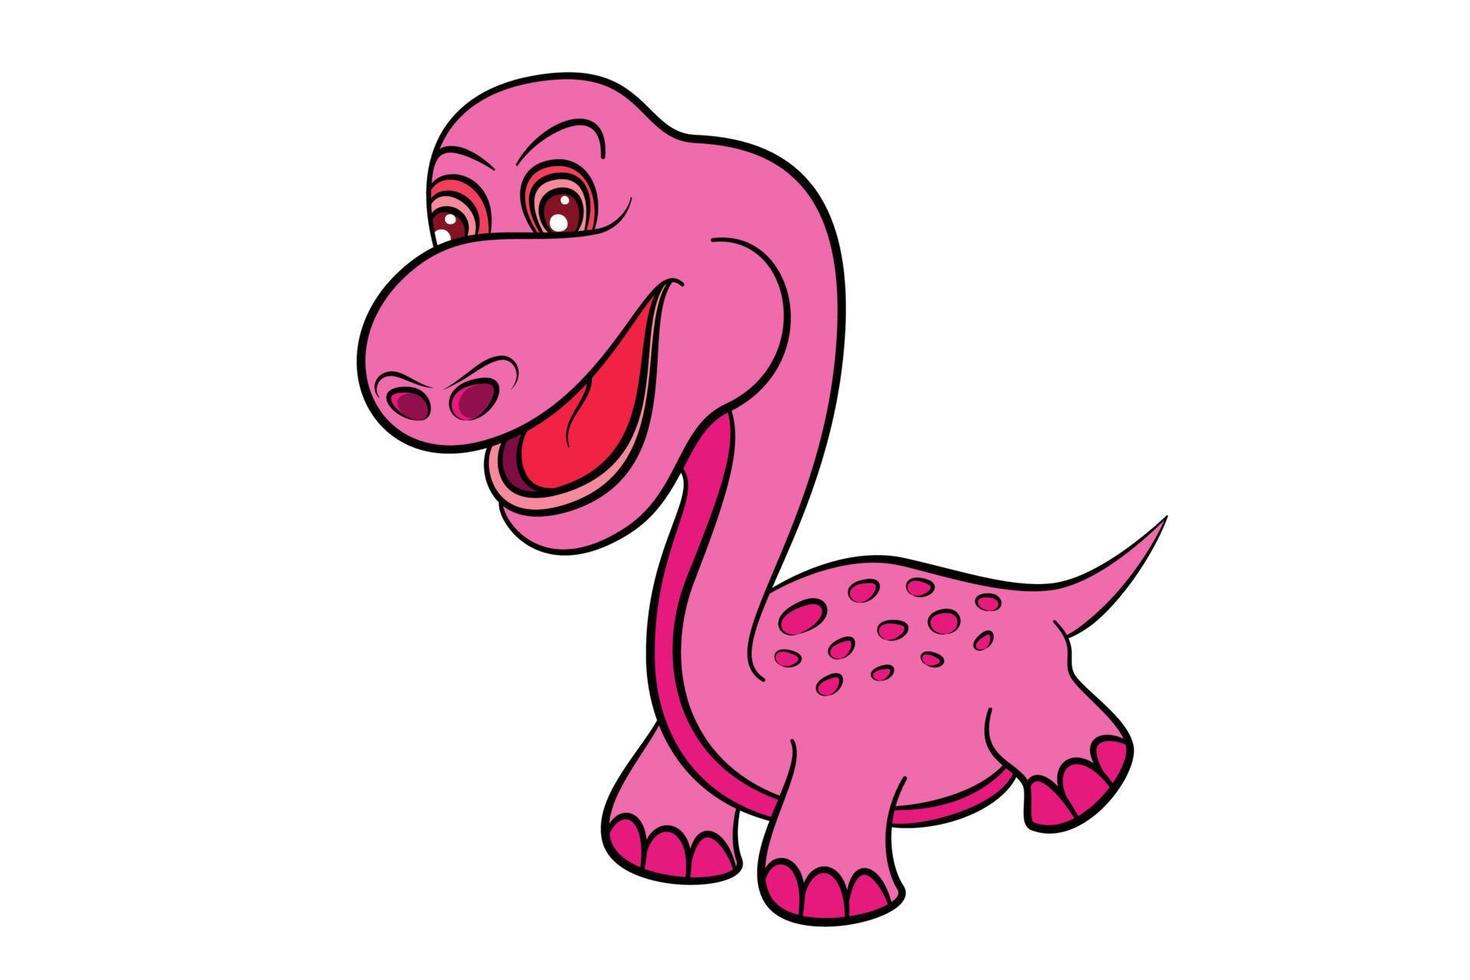 Pink dinosaur cartoon character on white isolated background vector